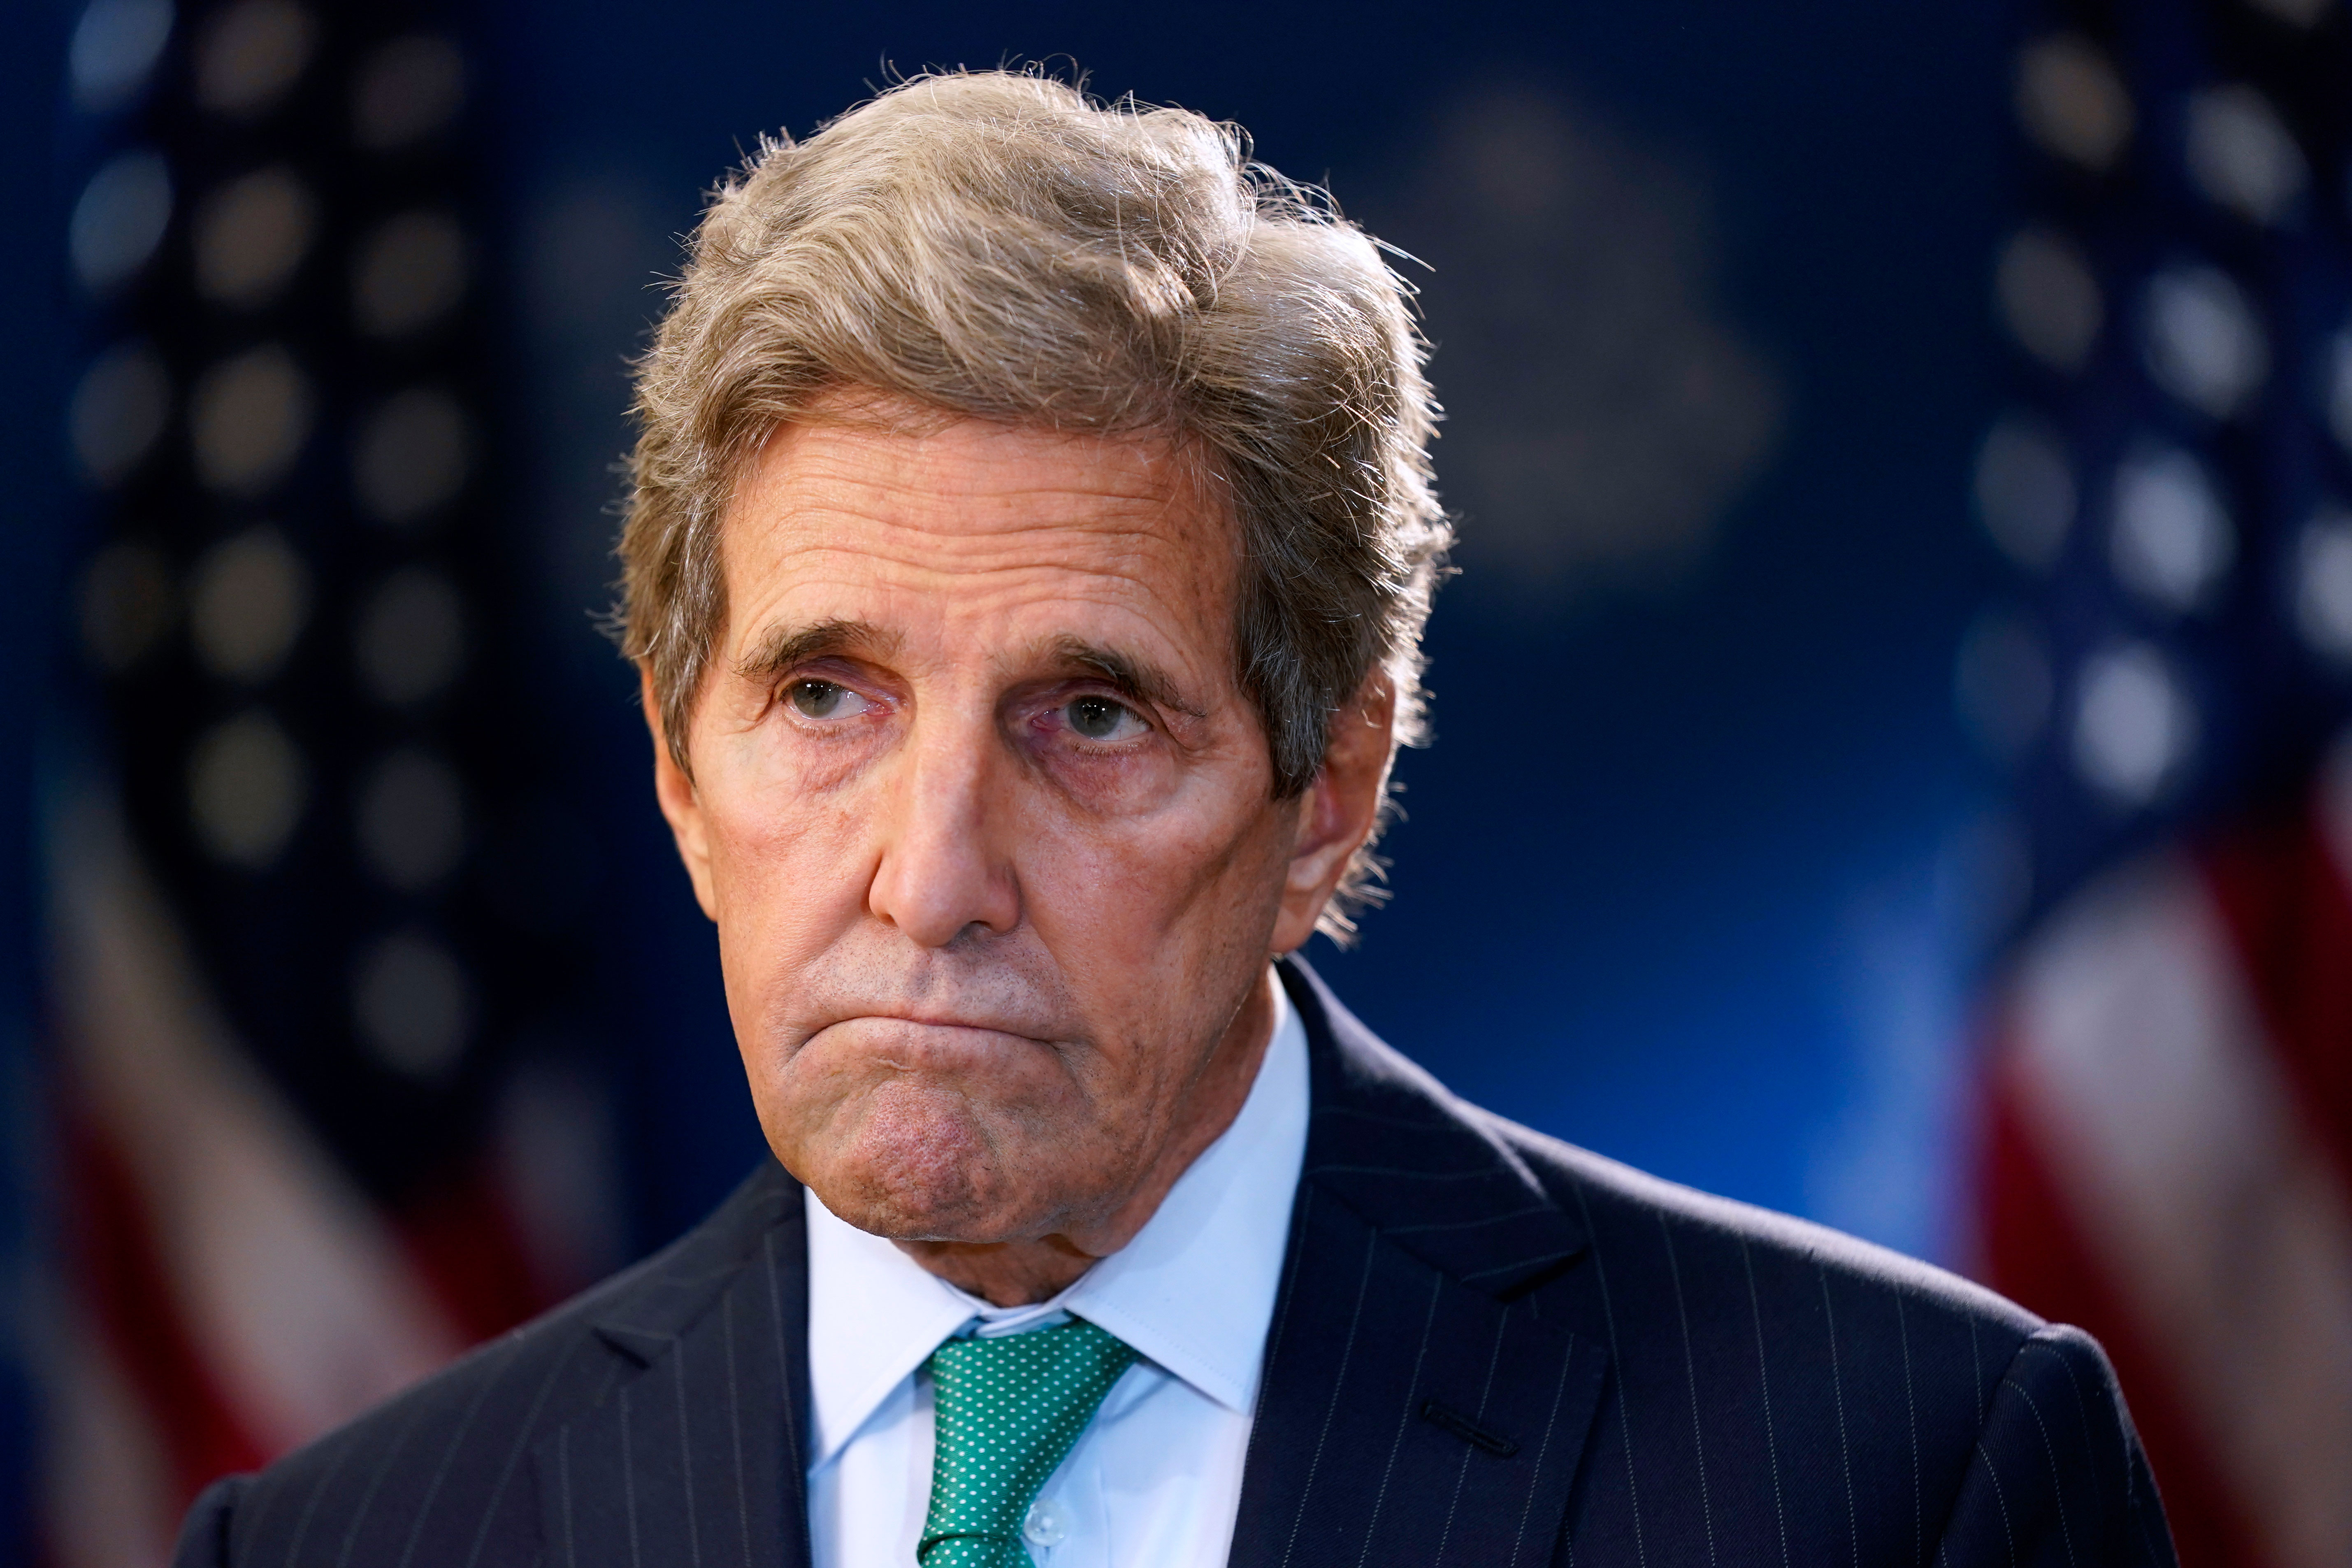 John Kerry, the United States' special presidential envoy for climate, listens during an interview with the Associated Press in Washington, DC, on October 13.